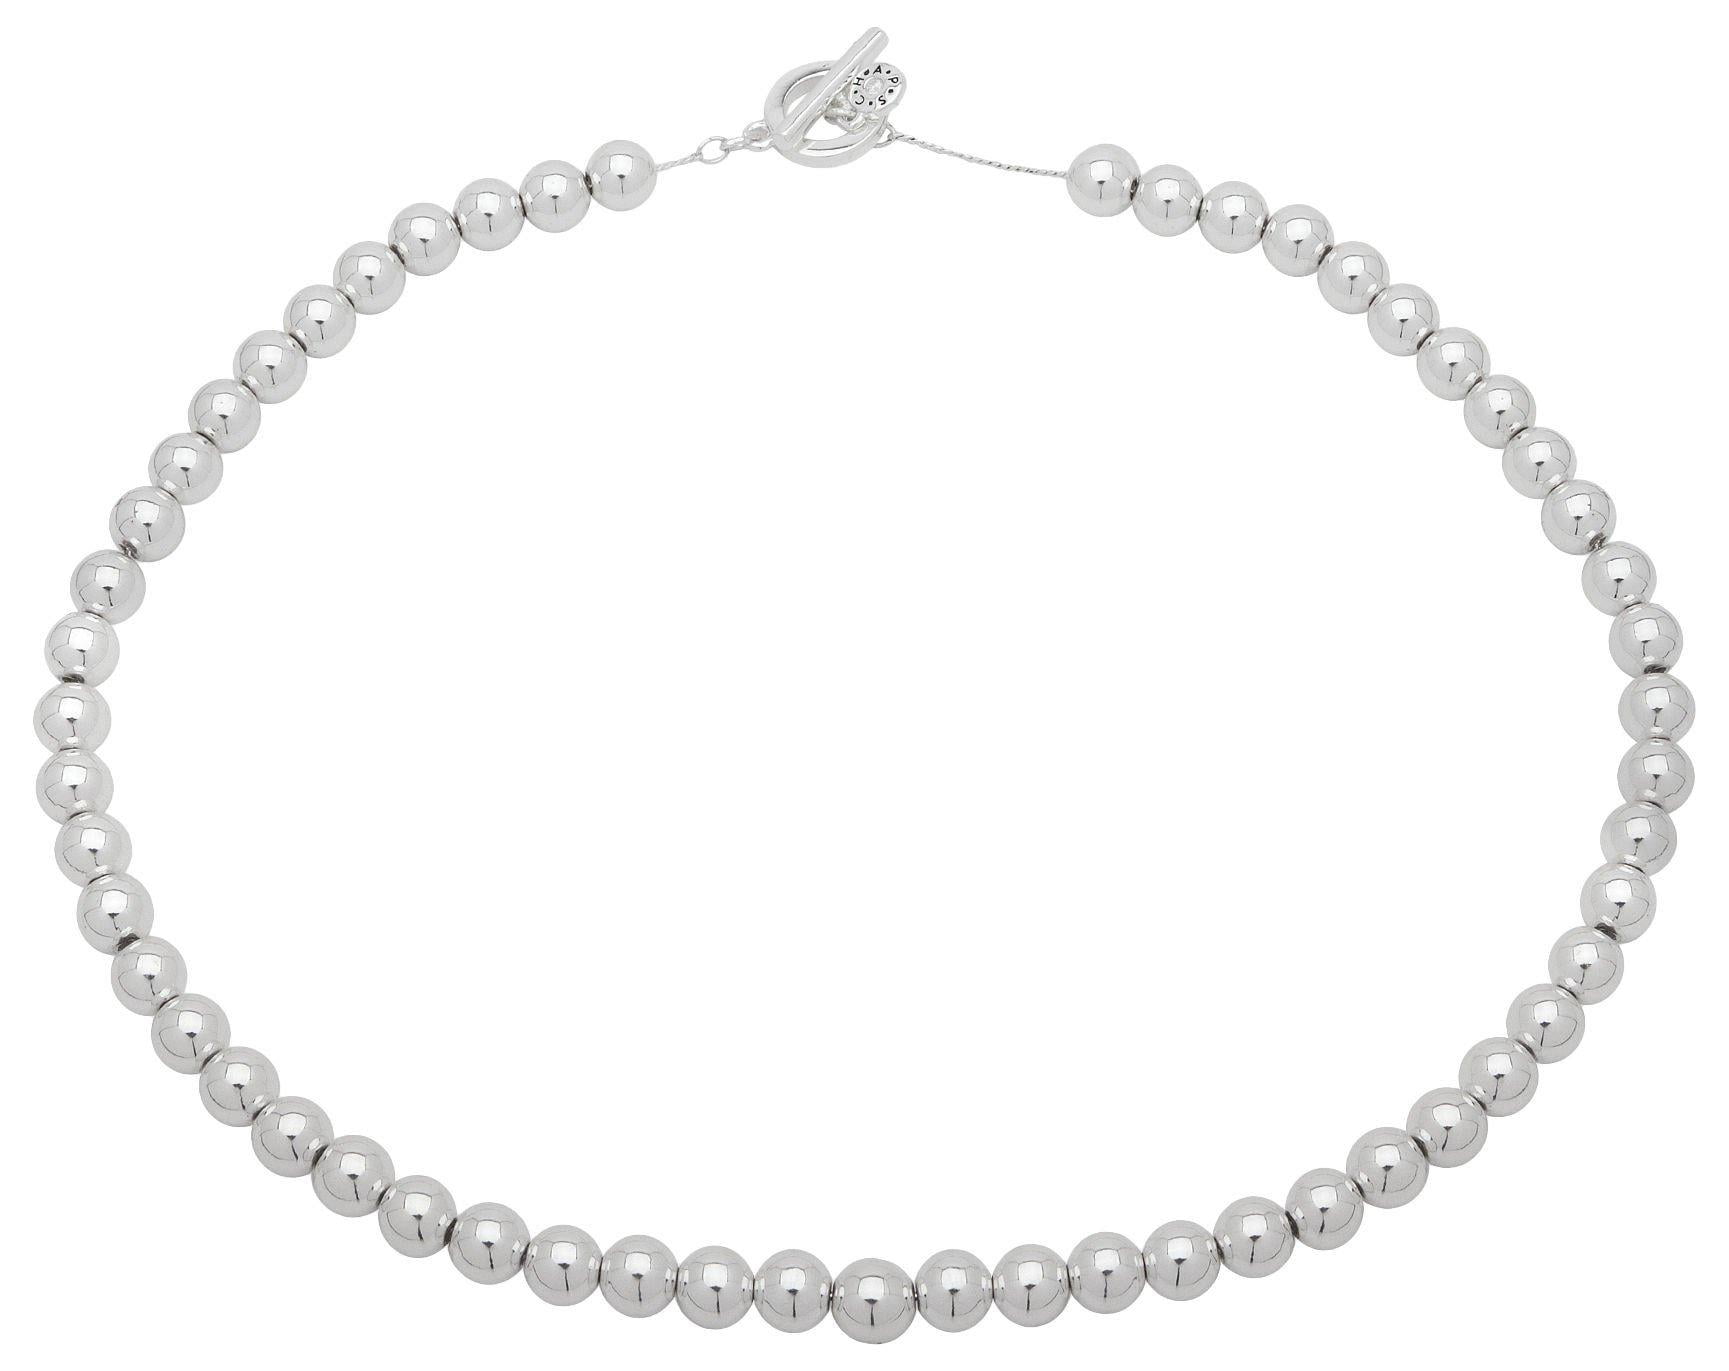 Chaps Women's Silver Tone Metal Bead Collar Necklace, 18